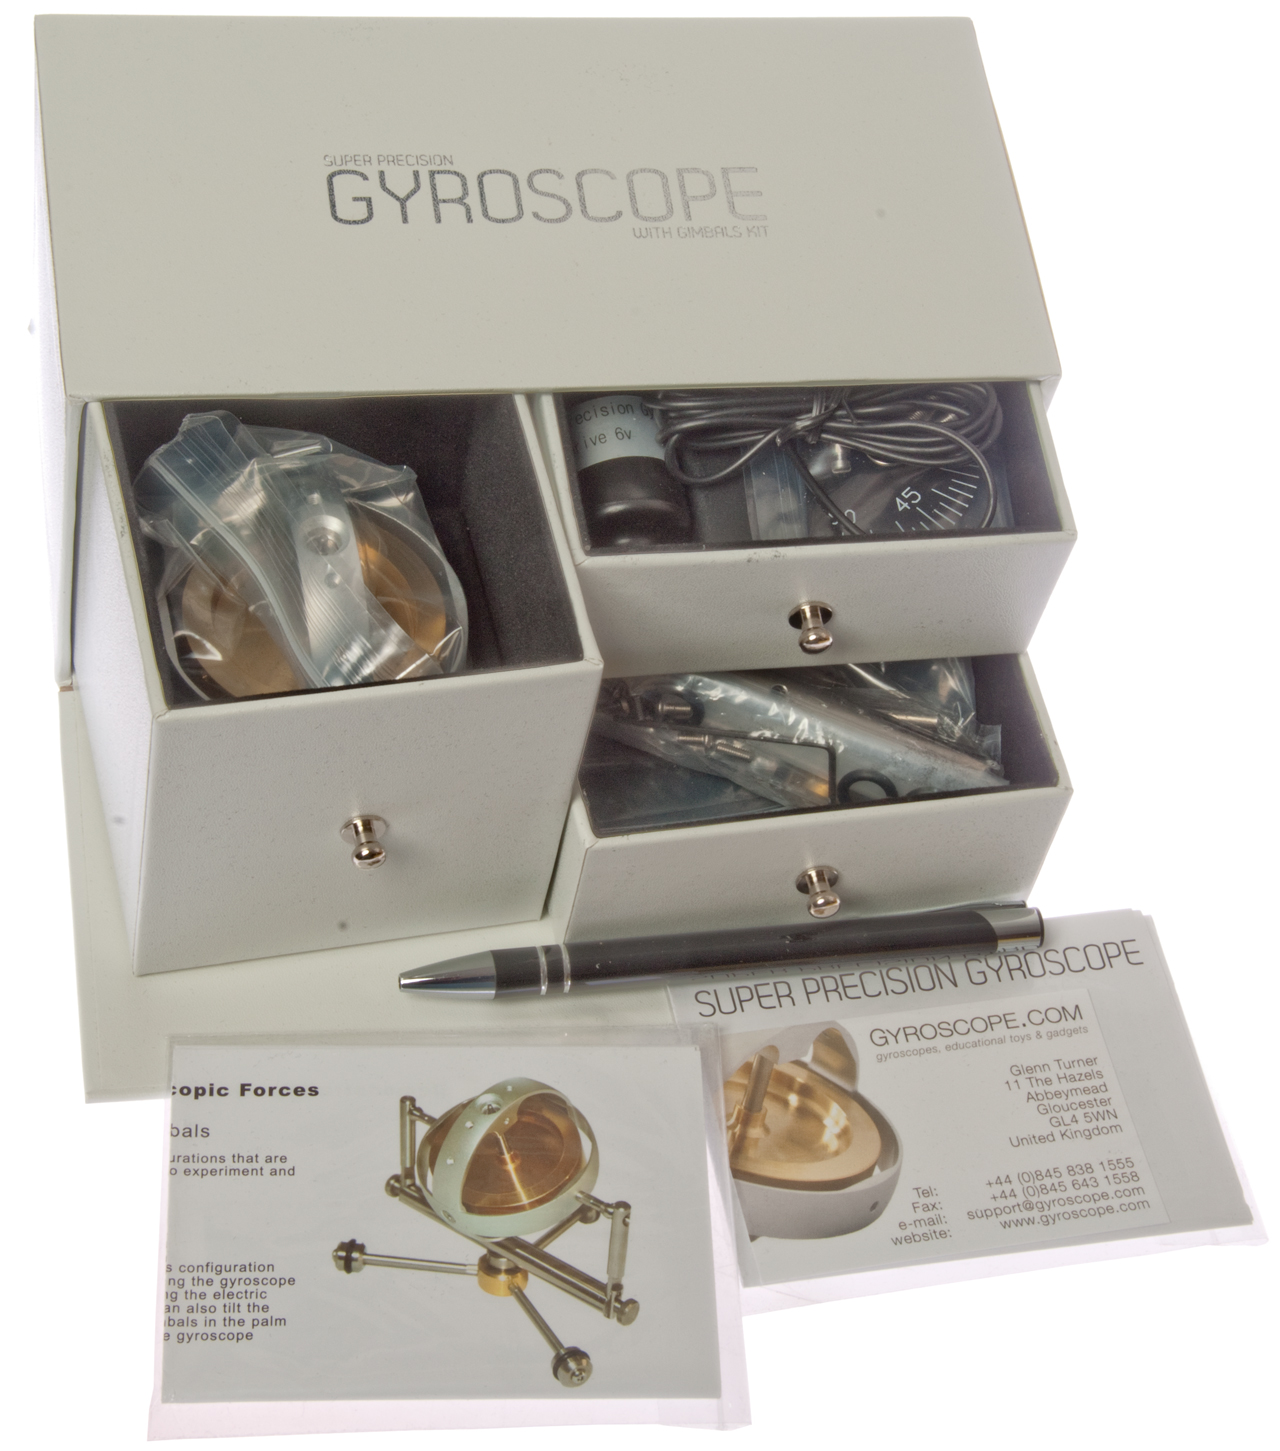 Super Precision Gyroscope (without gimbals) - From Gyroscope.com